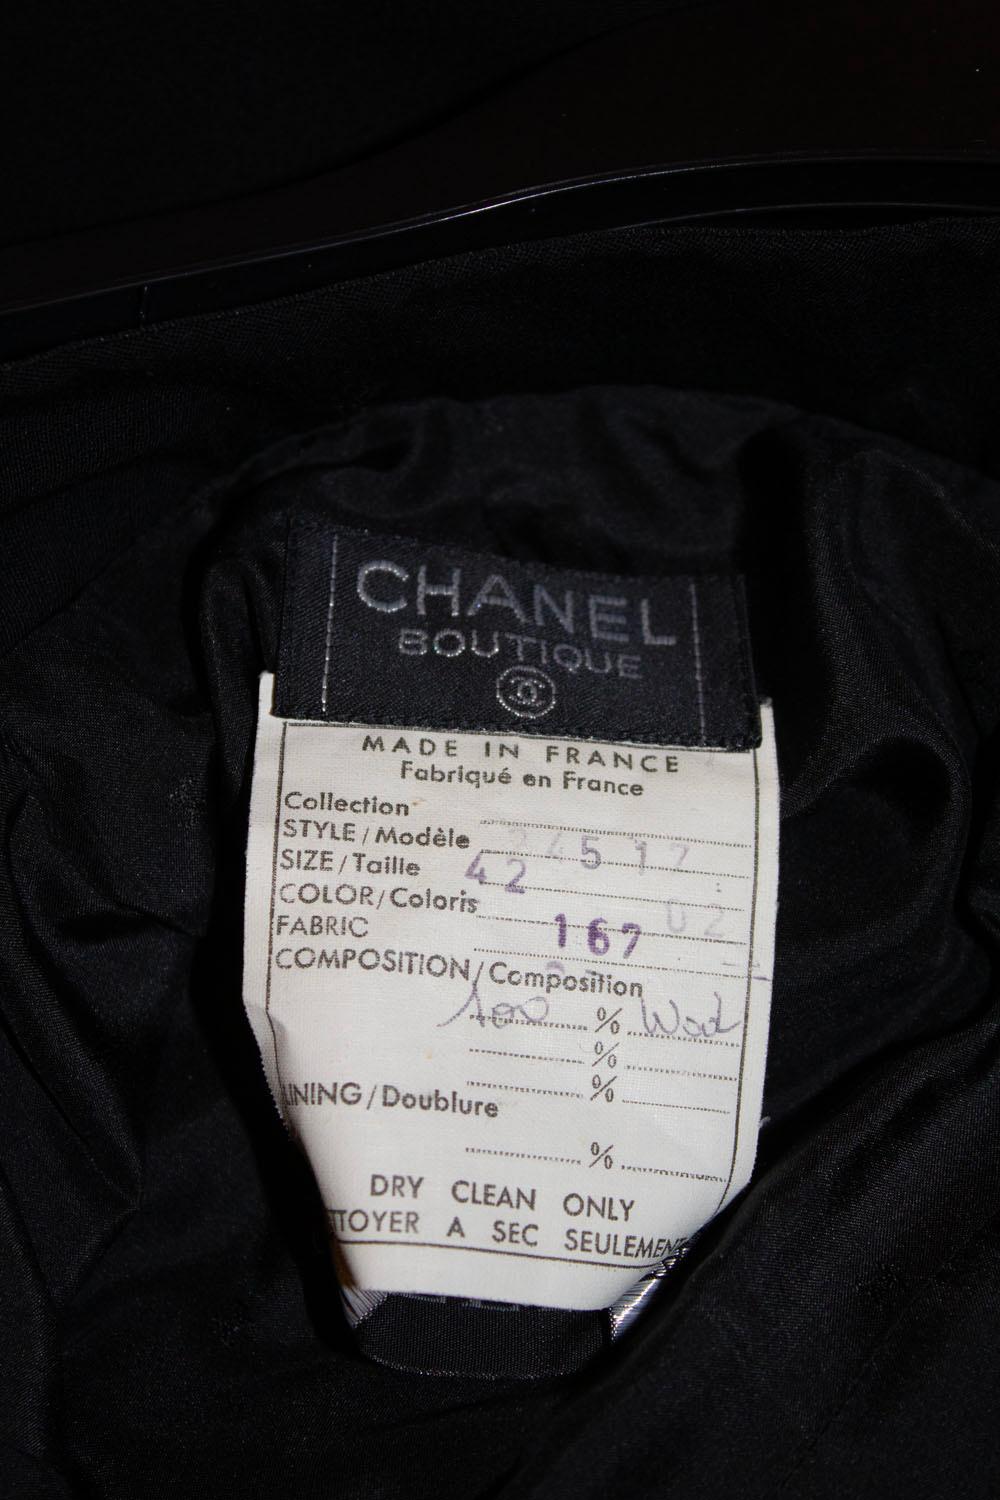 A stunning pair of vintage Chanel tuxedo style pants.  The pants /trousers have a black satin ribbon running along the side , a two button waist fastening and zip fly. They are fully lined.
Size 42 , Measurements: waist 28/9'', inside leg 30''
Hem 3